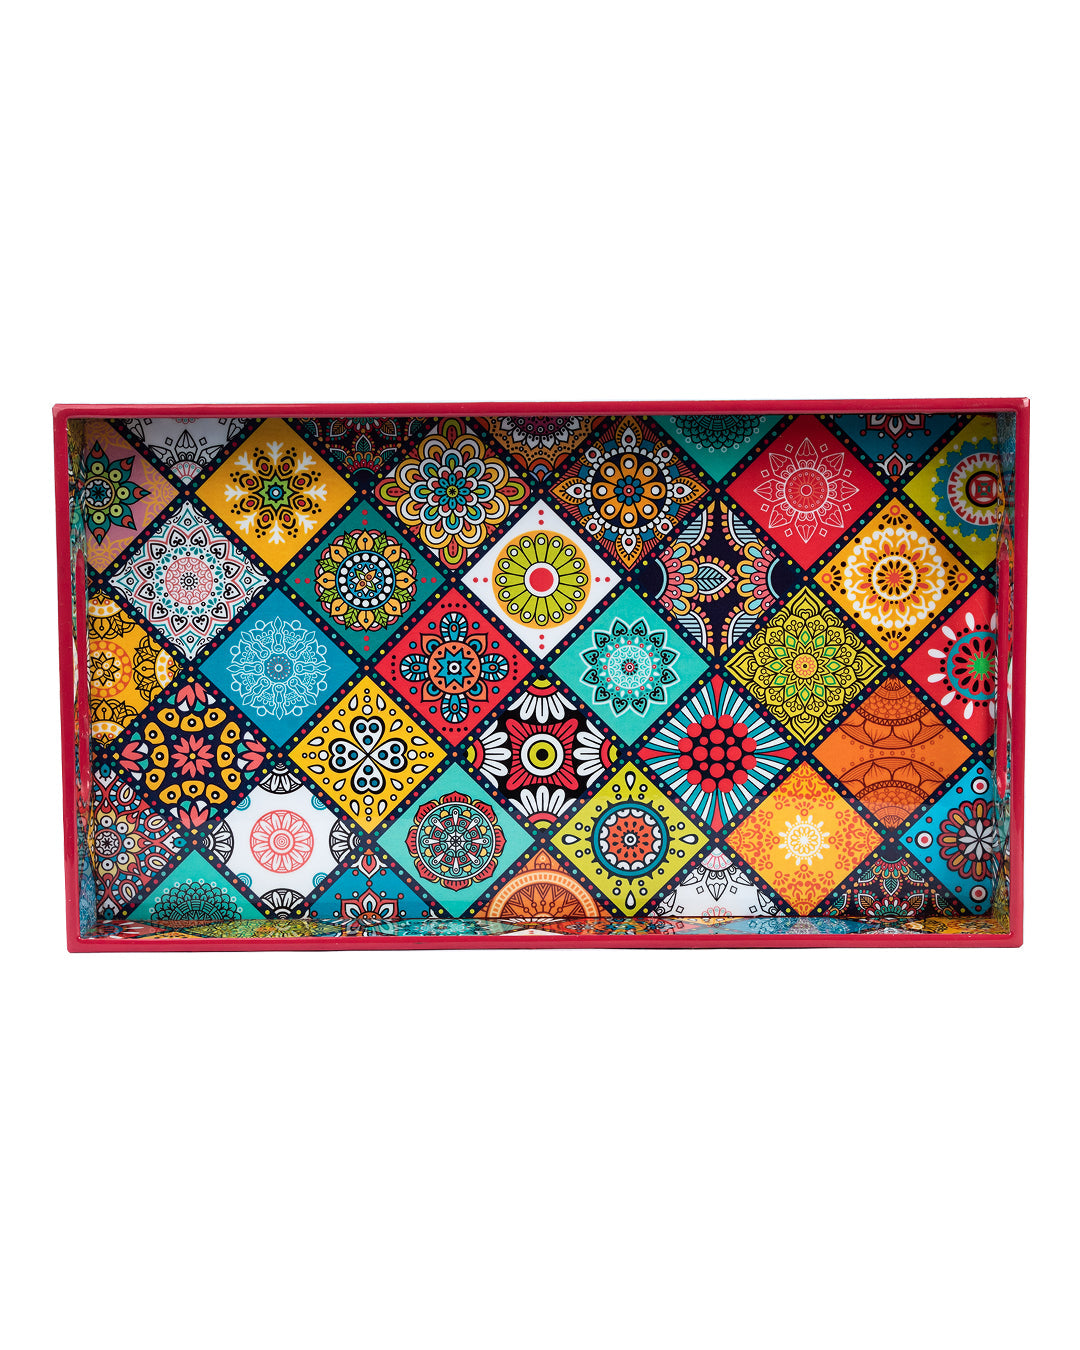 VON CASA Tray with Handle, Multiple Style Print, Multicolour, MDF